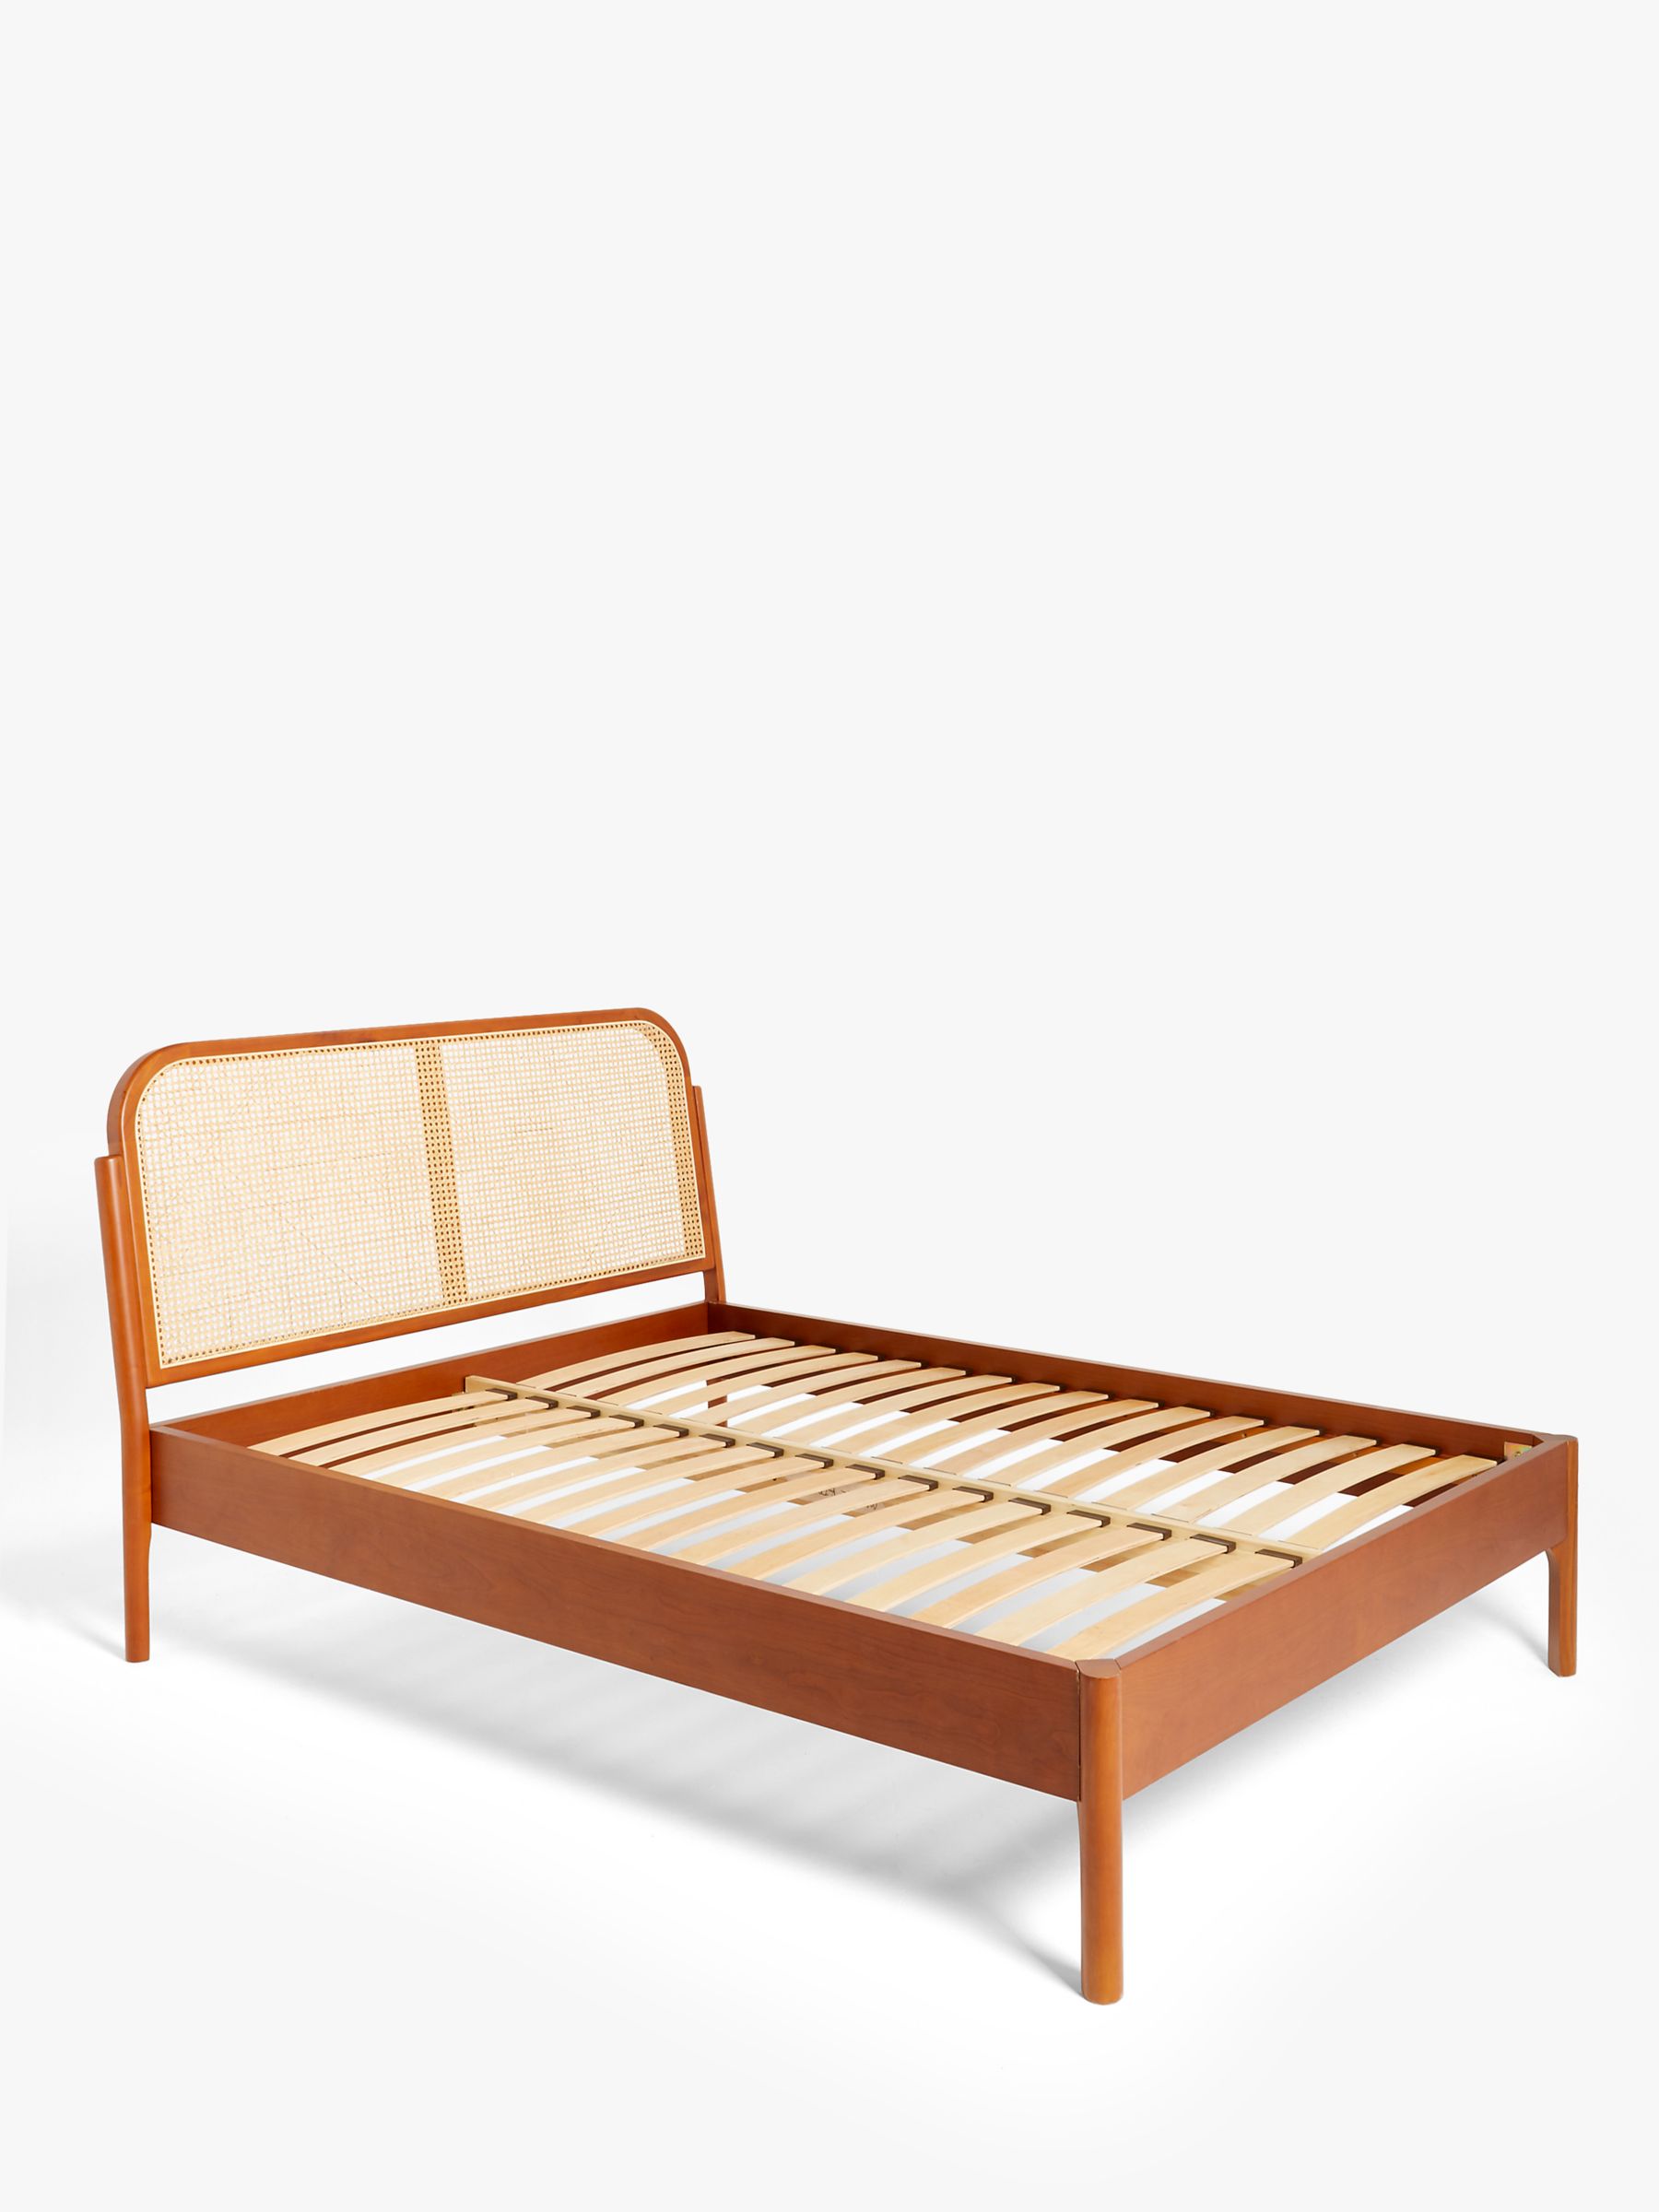 Photo of John lewis rattan cherry bed frame double brown